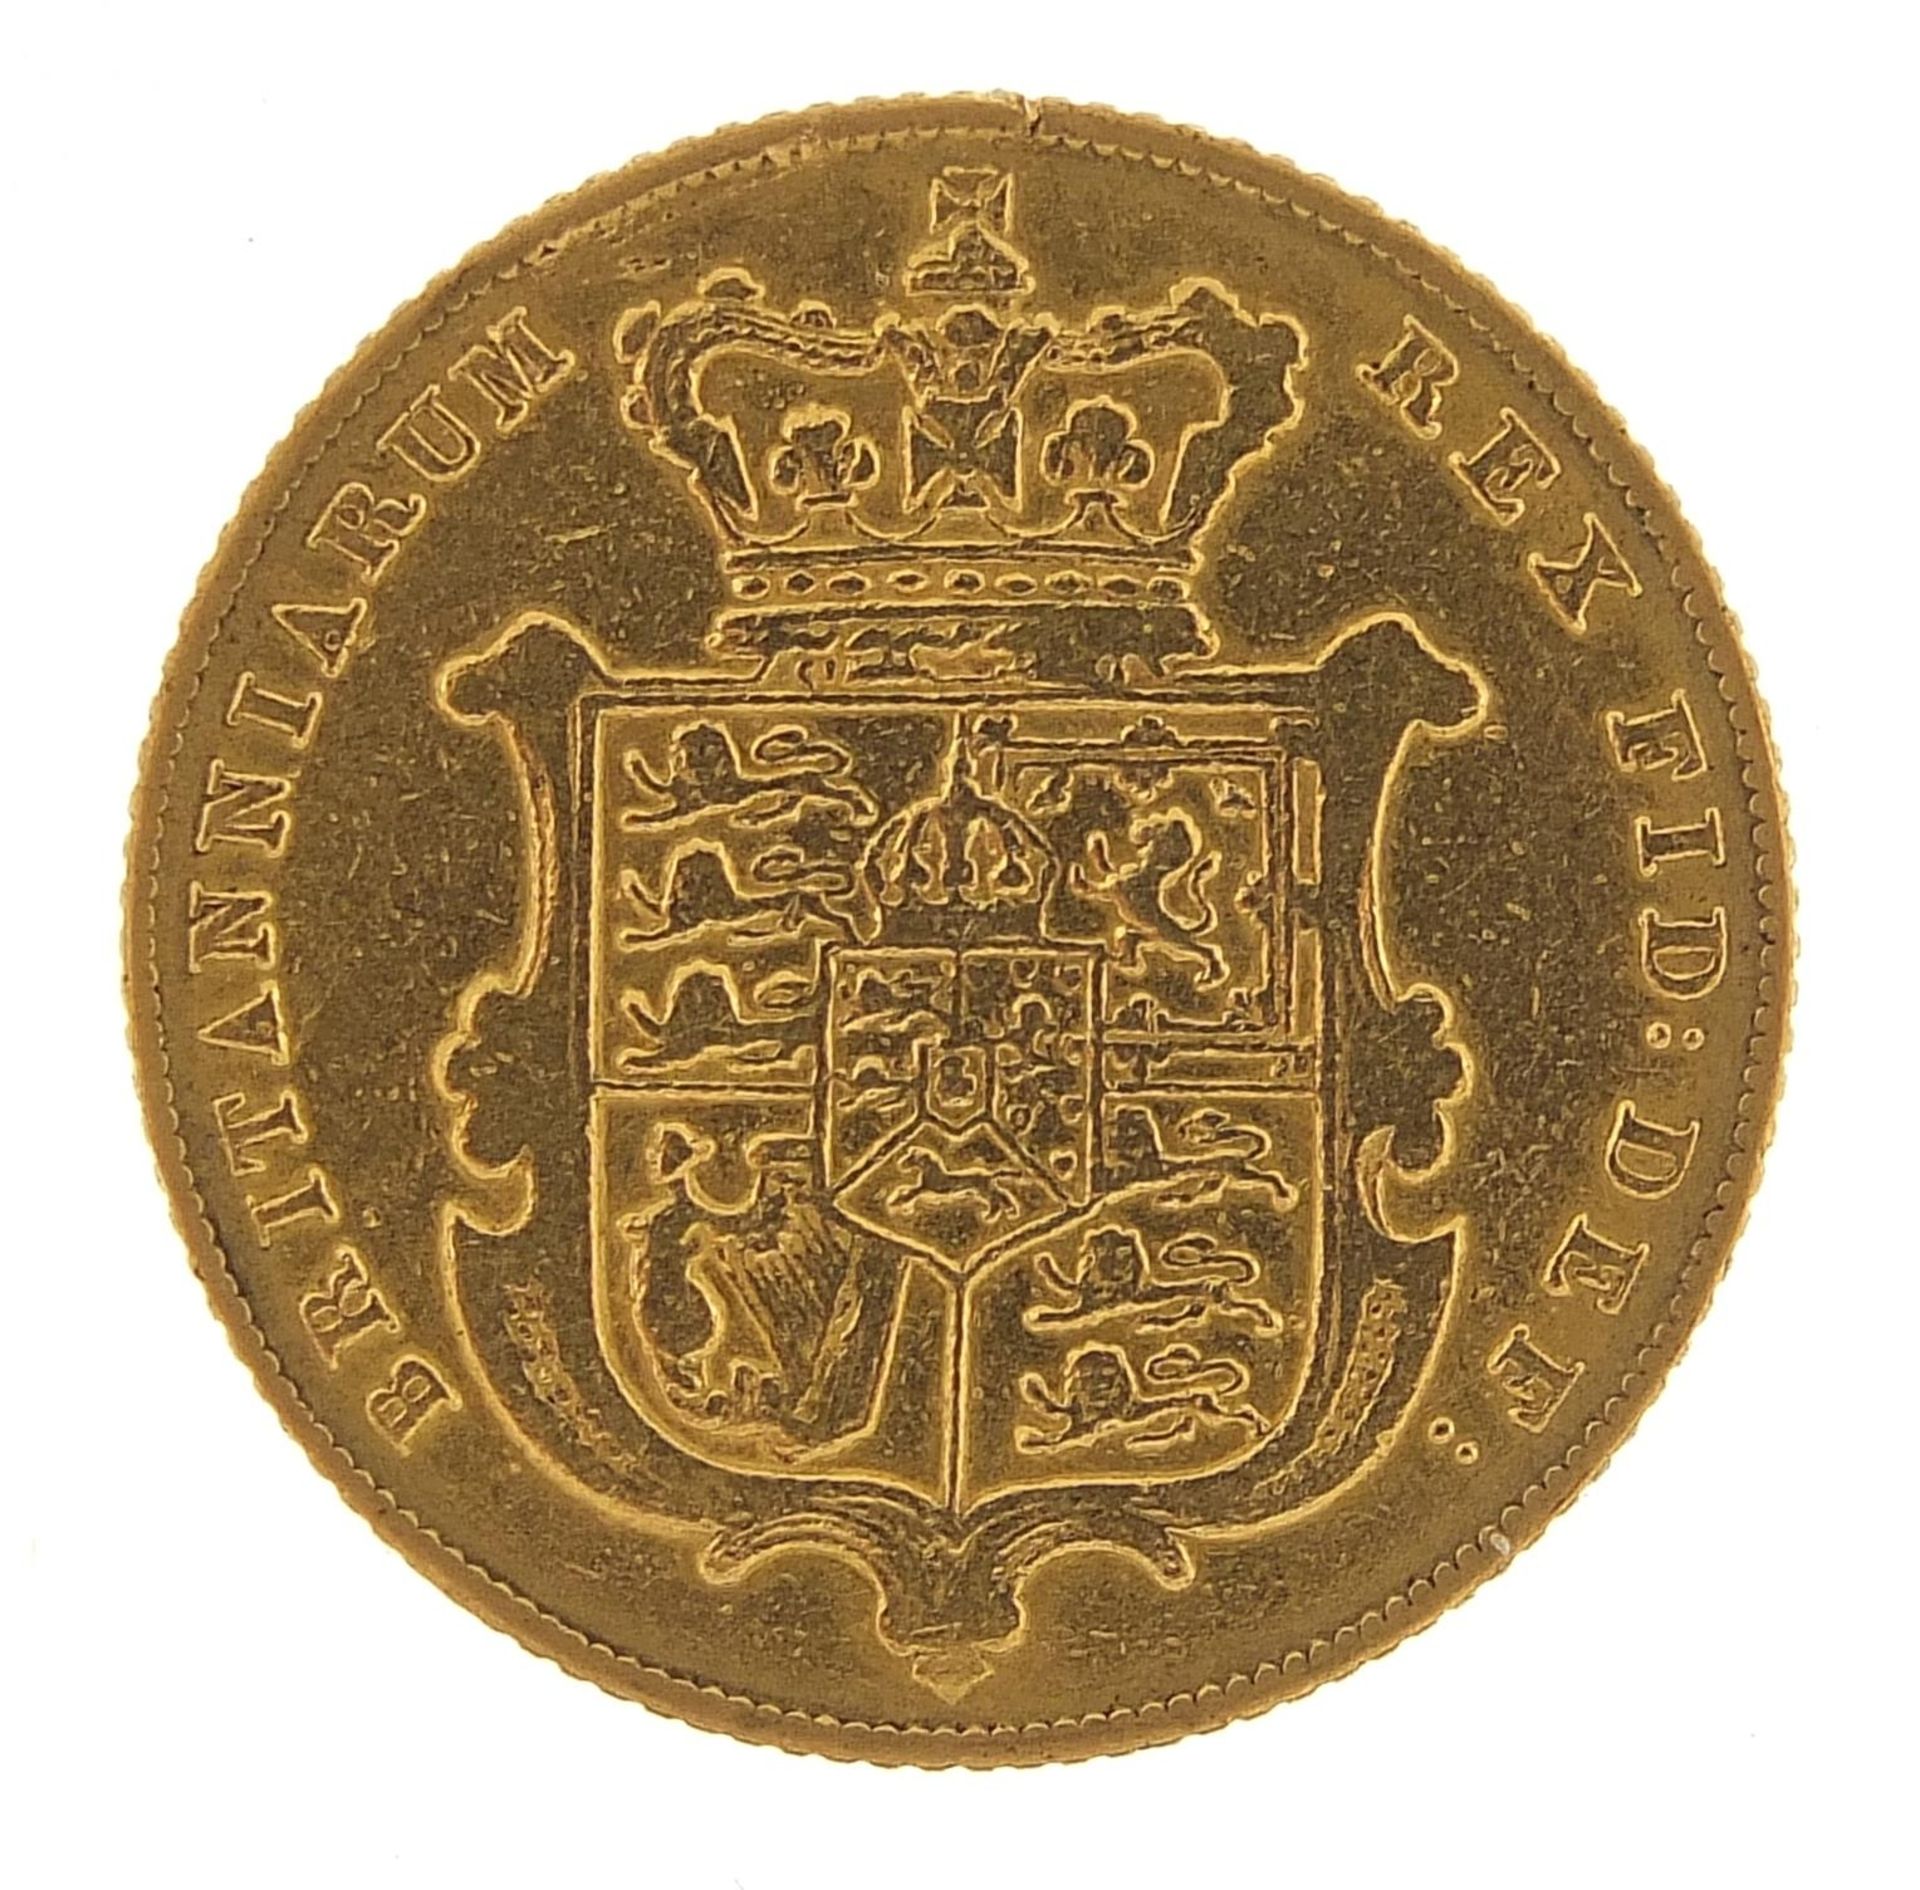 George IV 1826 gold shield back sovereign - this lot is sold without buyer's premium